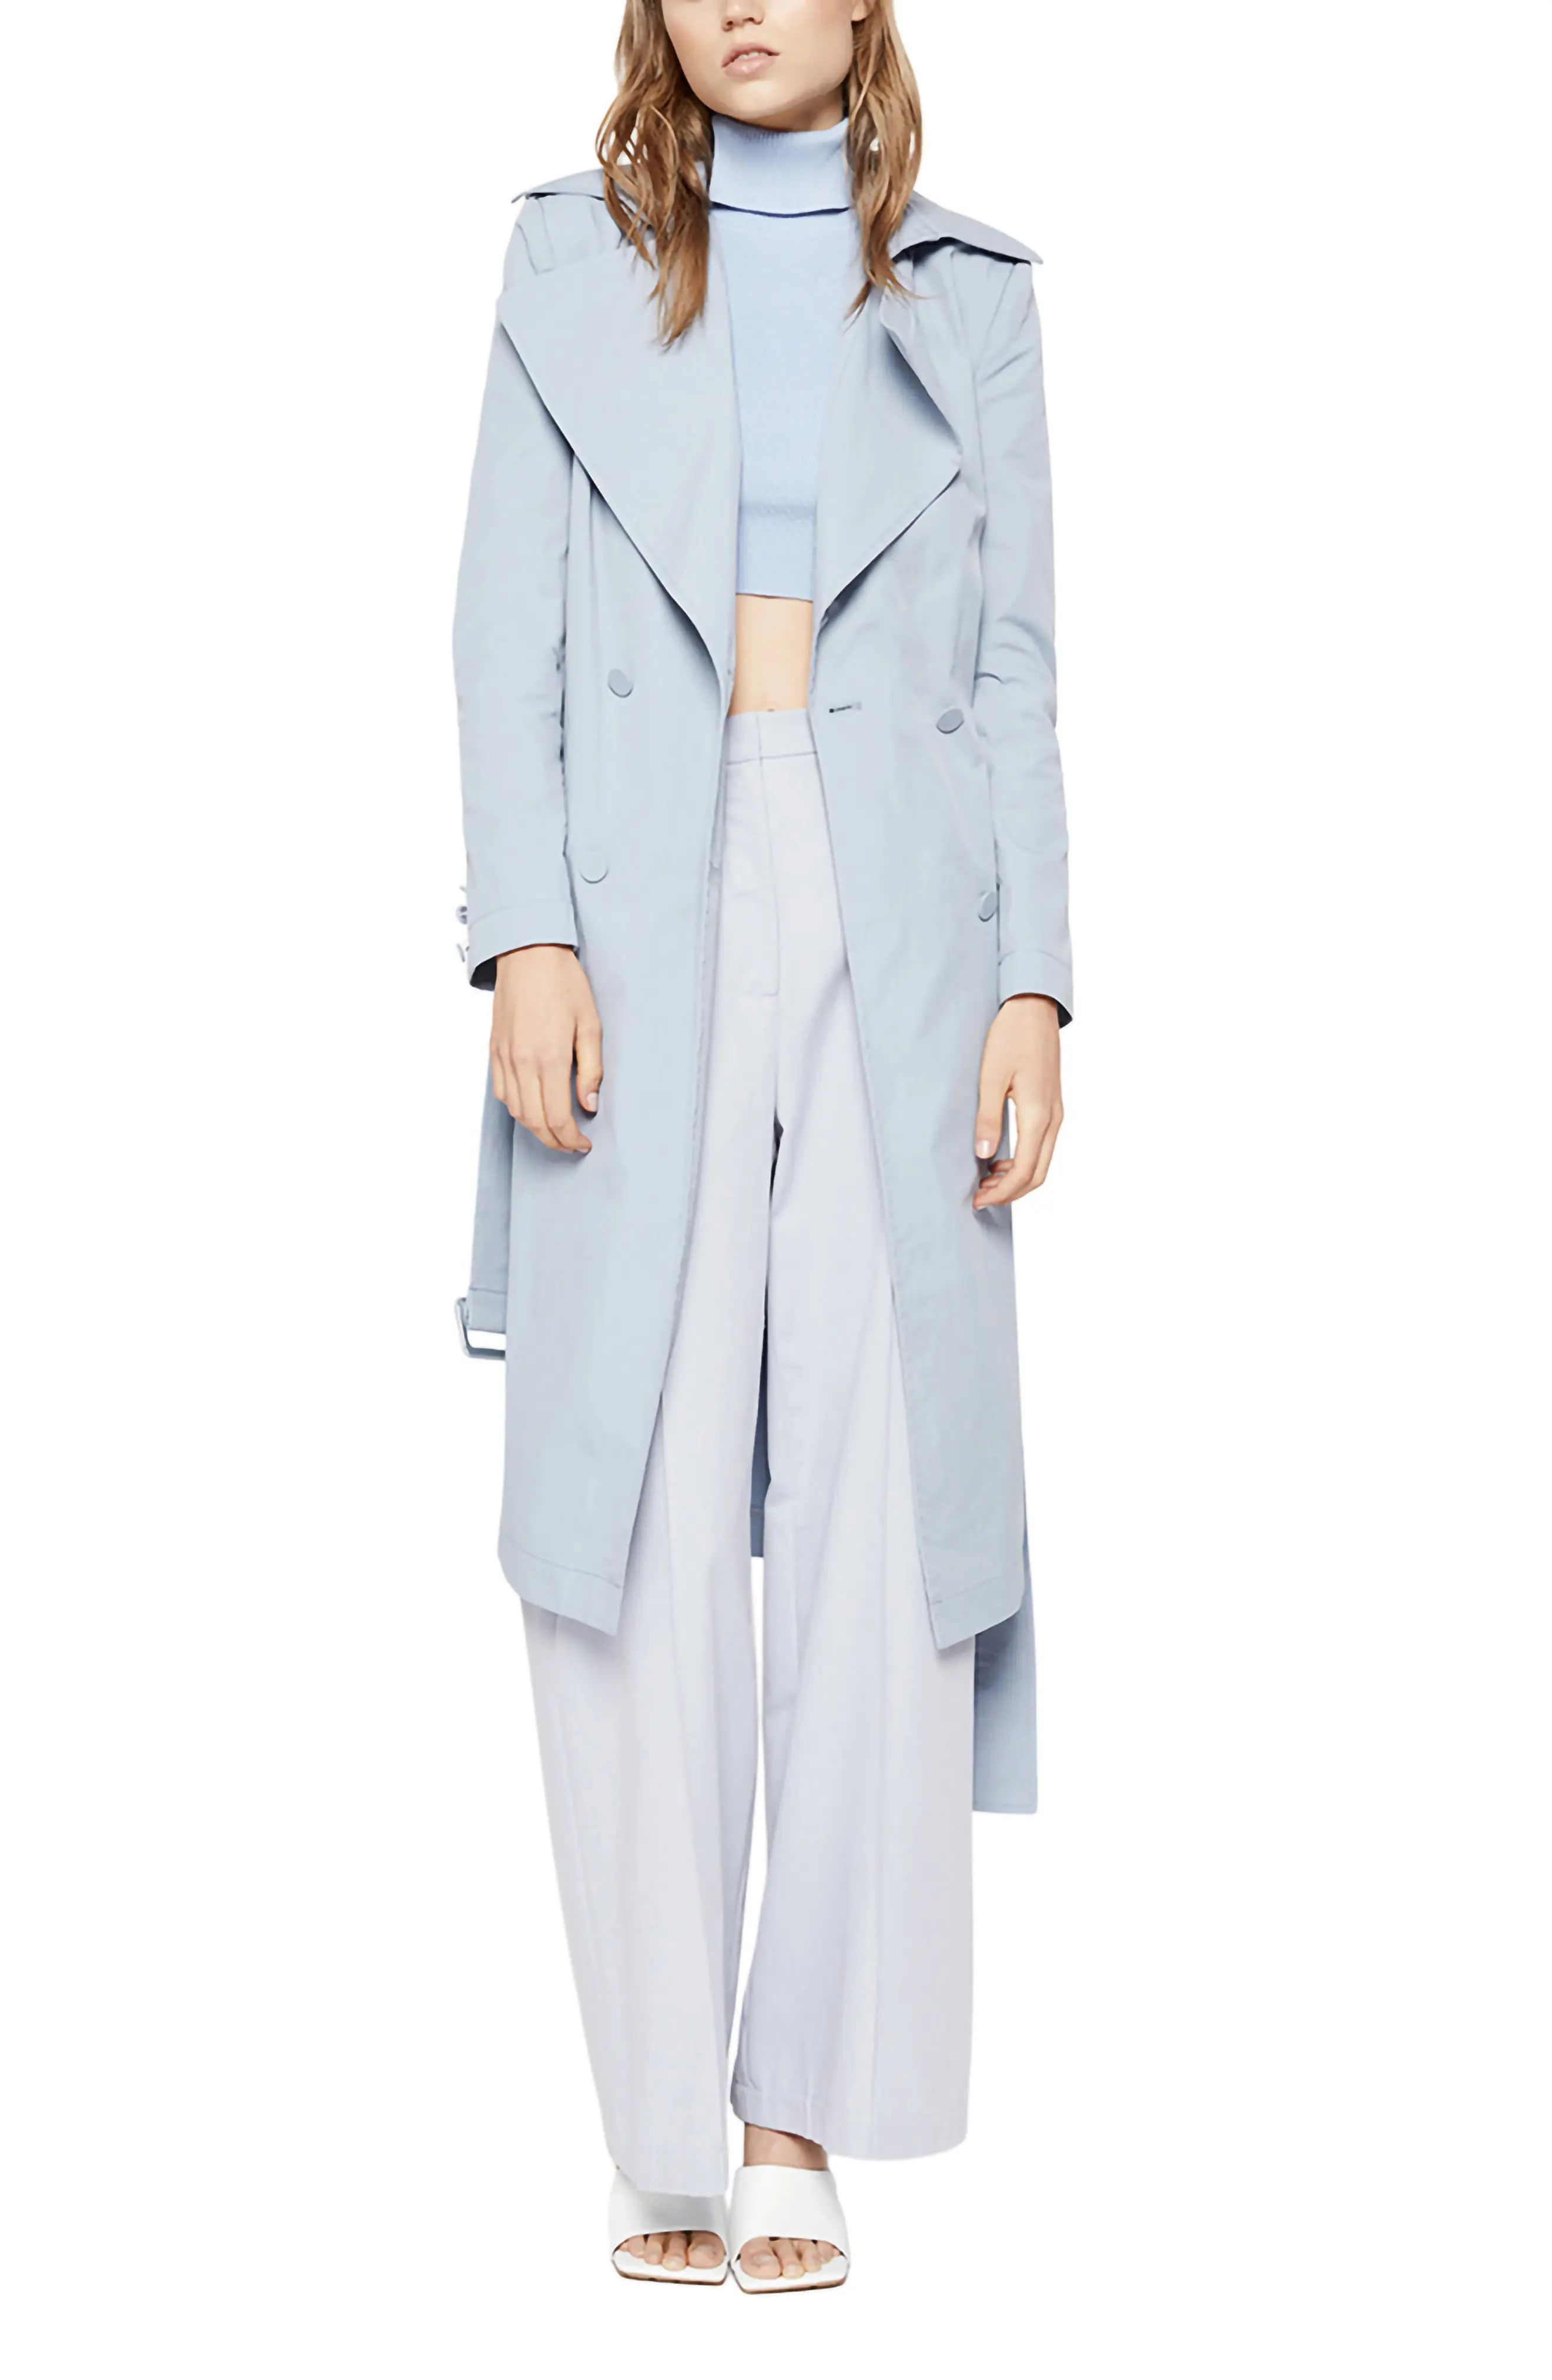 Bardot The Classic Cotton Blend Trench Coat in Sky Blue at Nordstrom, Size 6 | Nordstrom